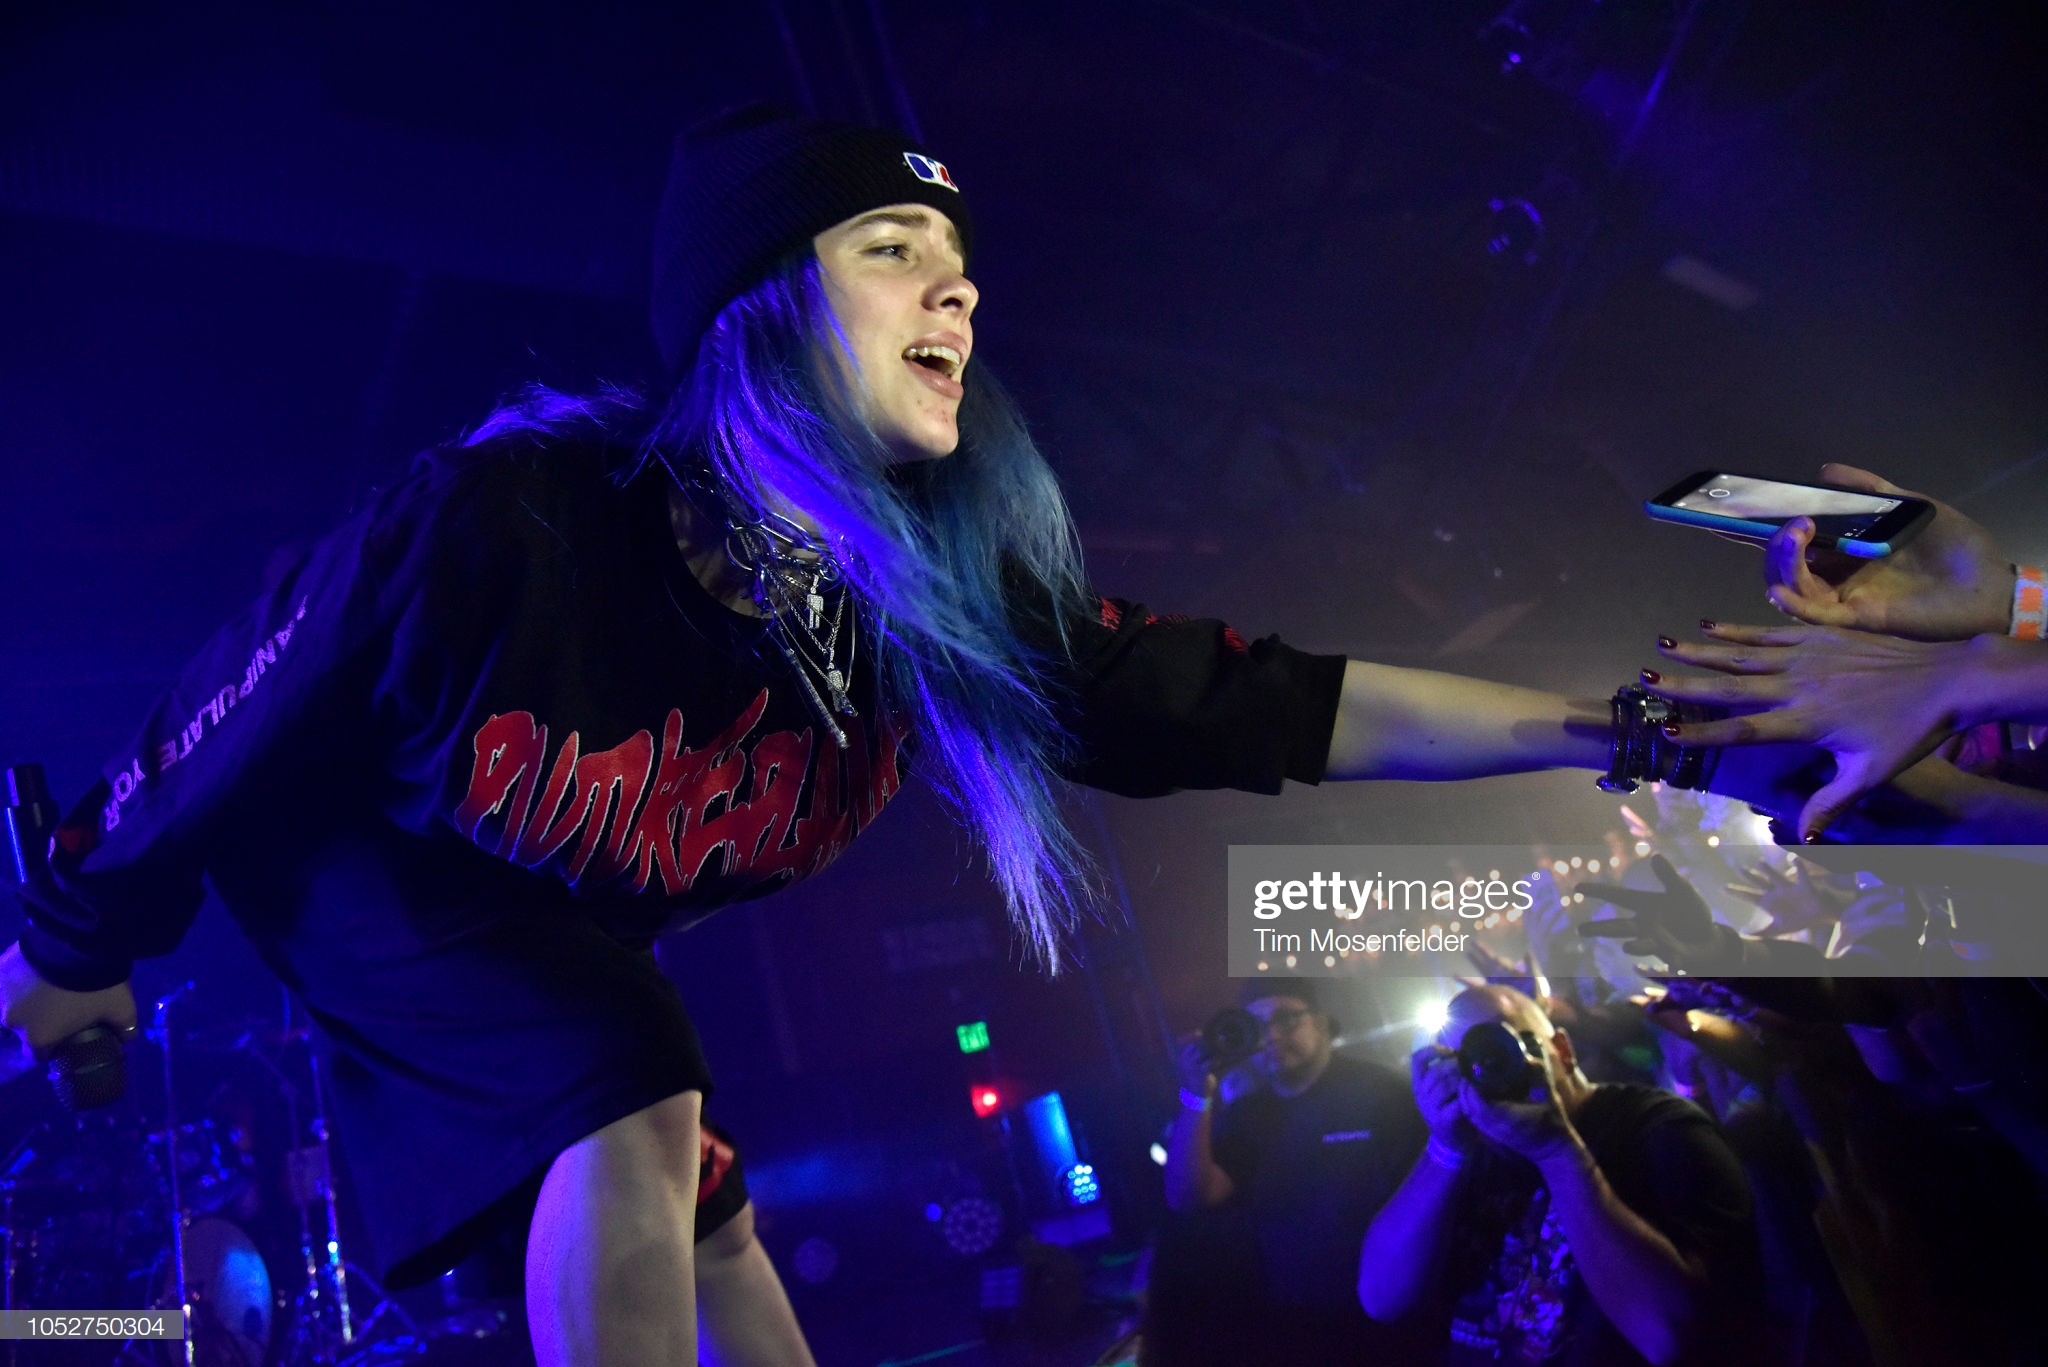 gettyimages-1052750304-2048x2048.jpg